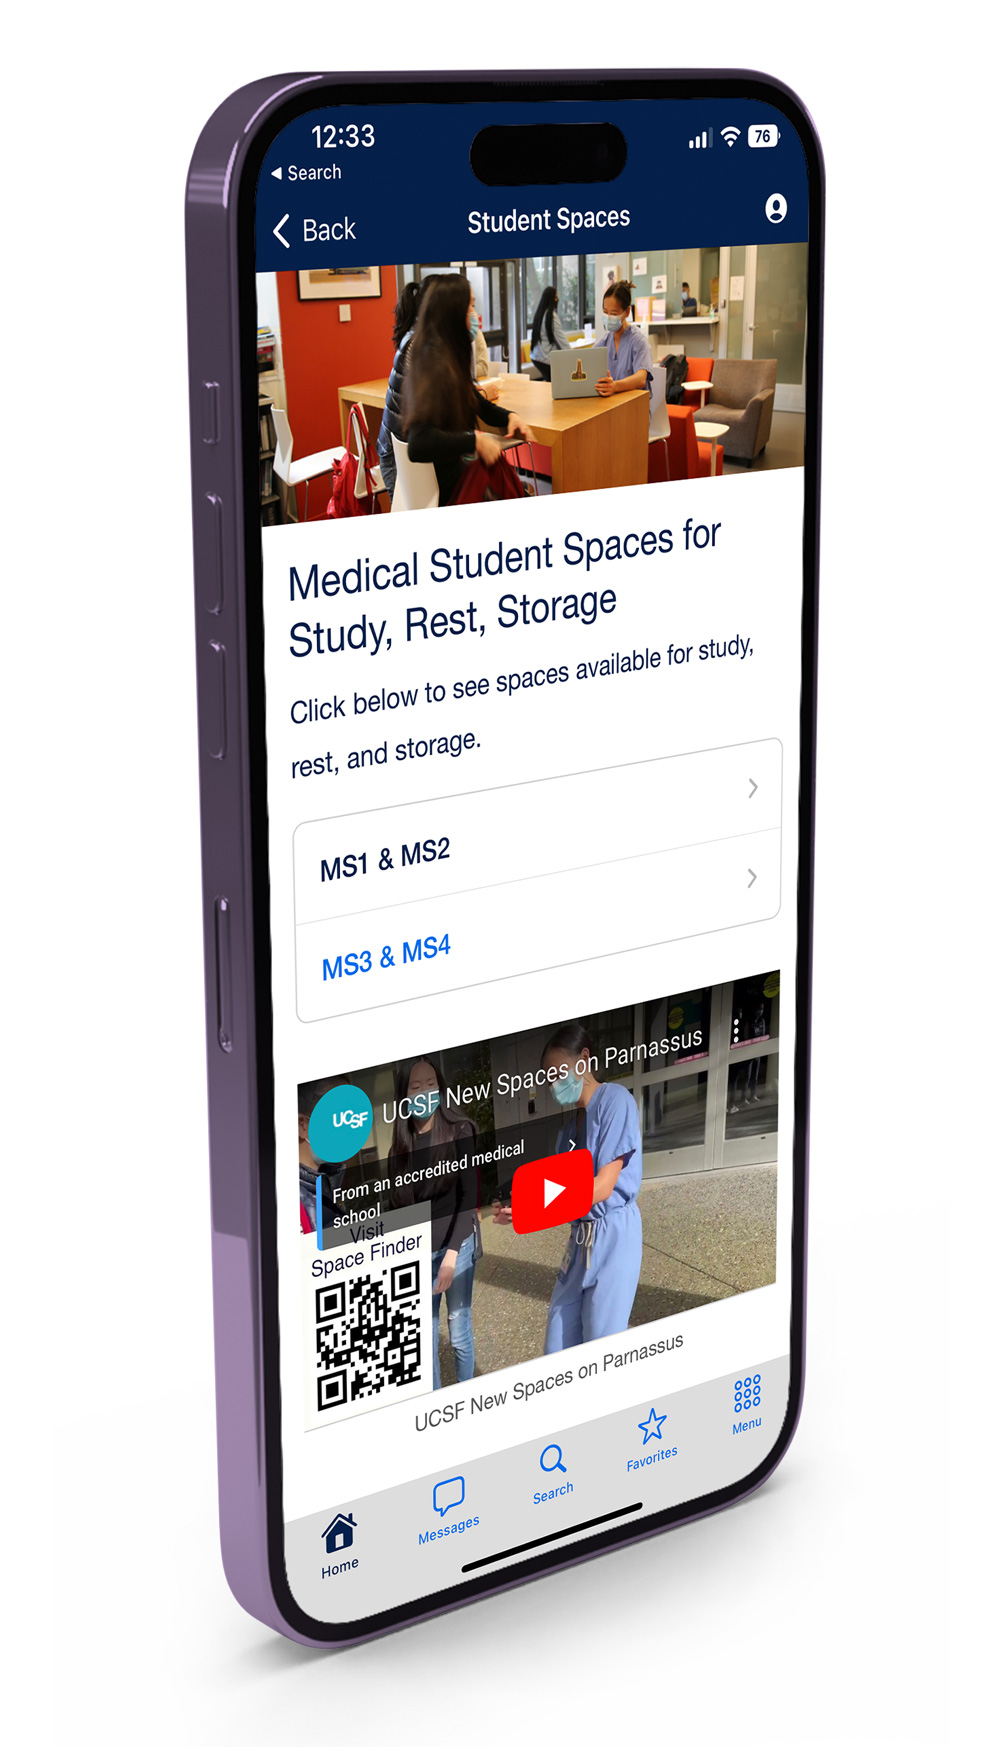 phone displaying a screen from the student space finder section of the UCSF Mobile app